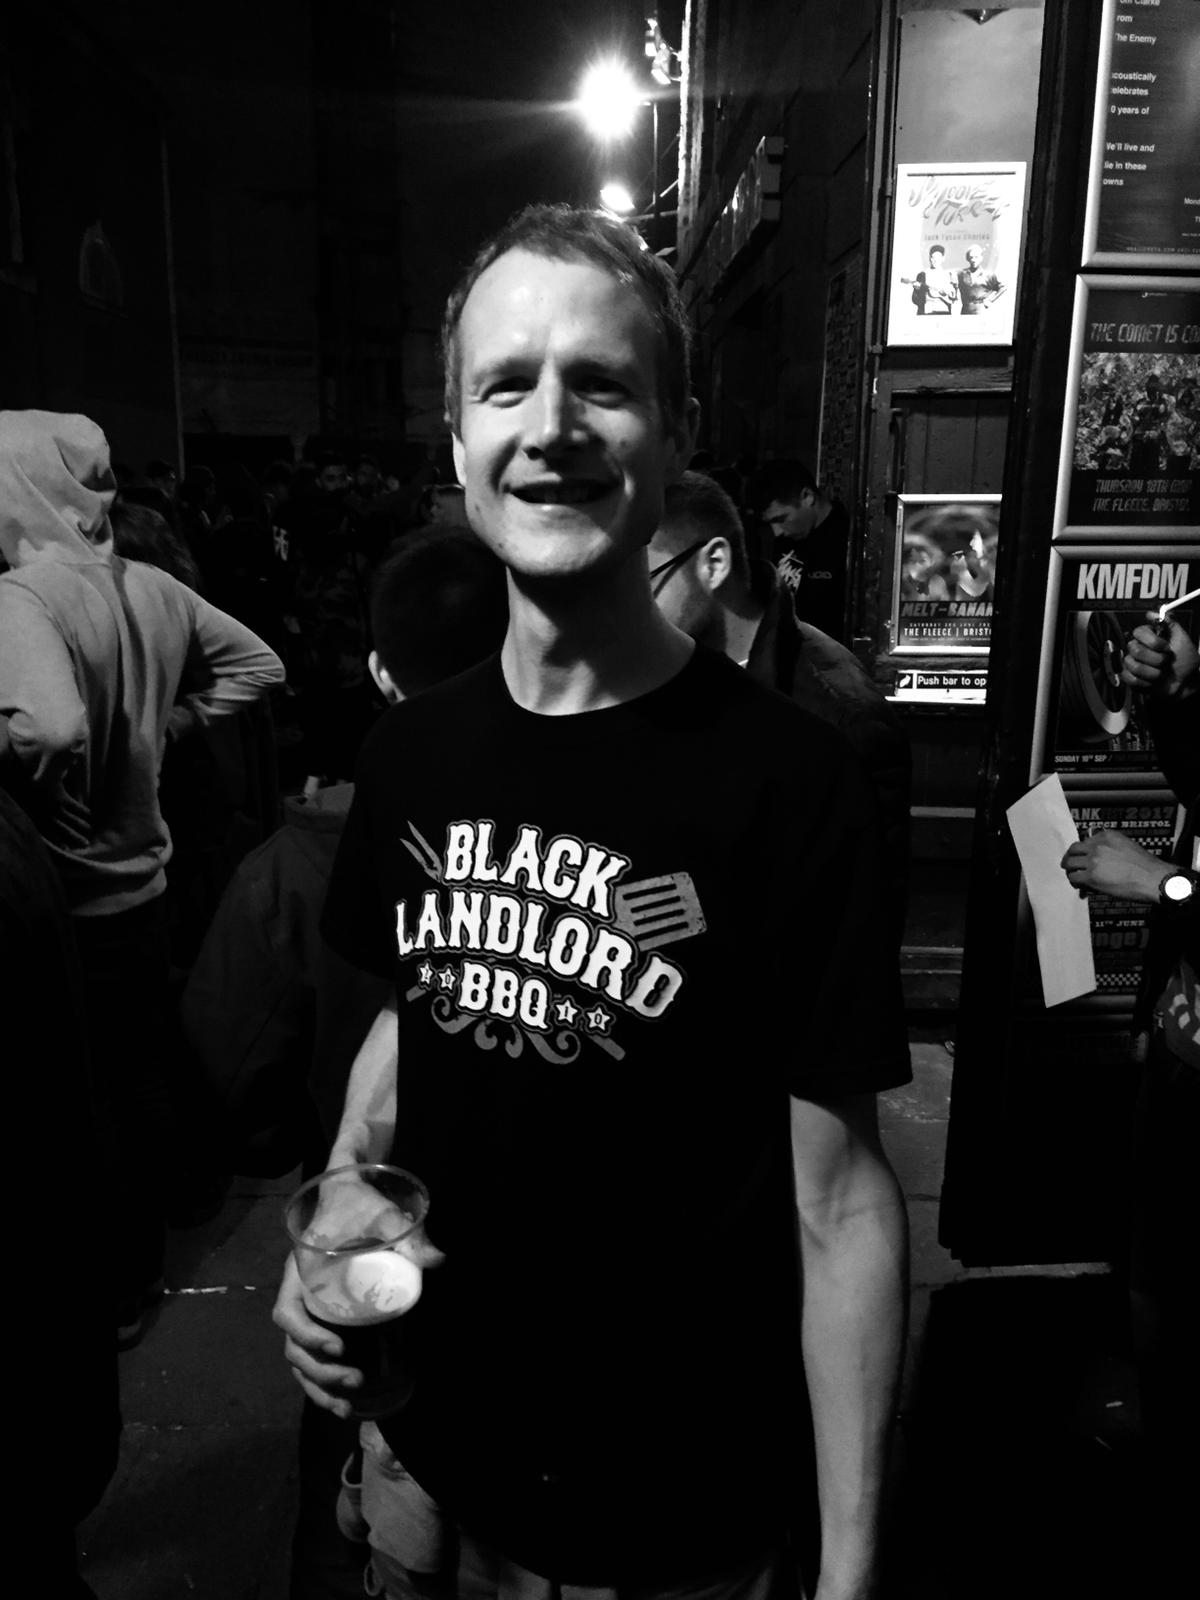 Photo of Ben Corrigan with a beer and wearing a Black Landlord T-shirt